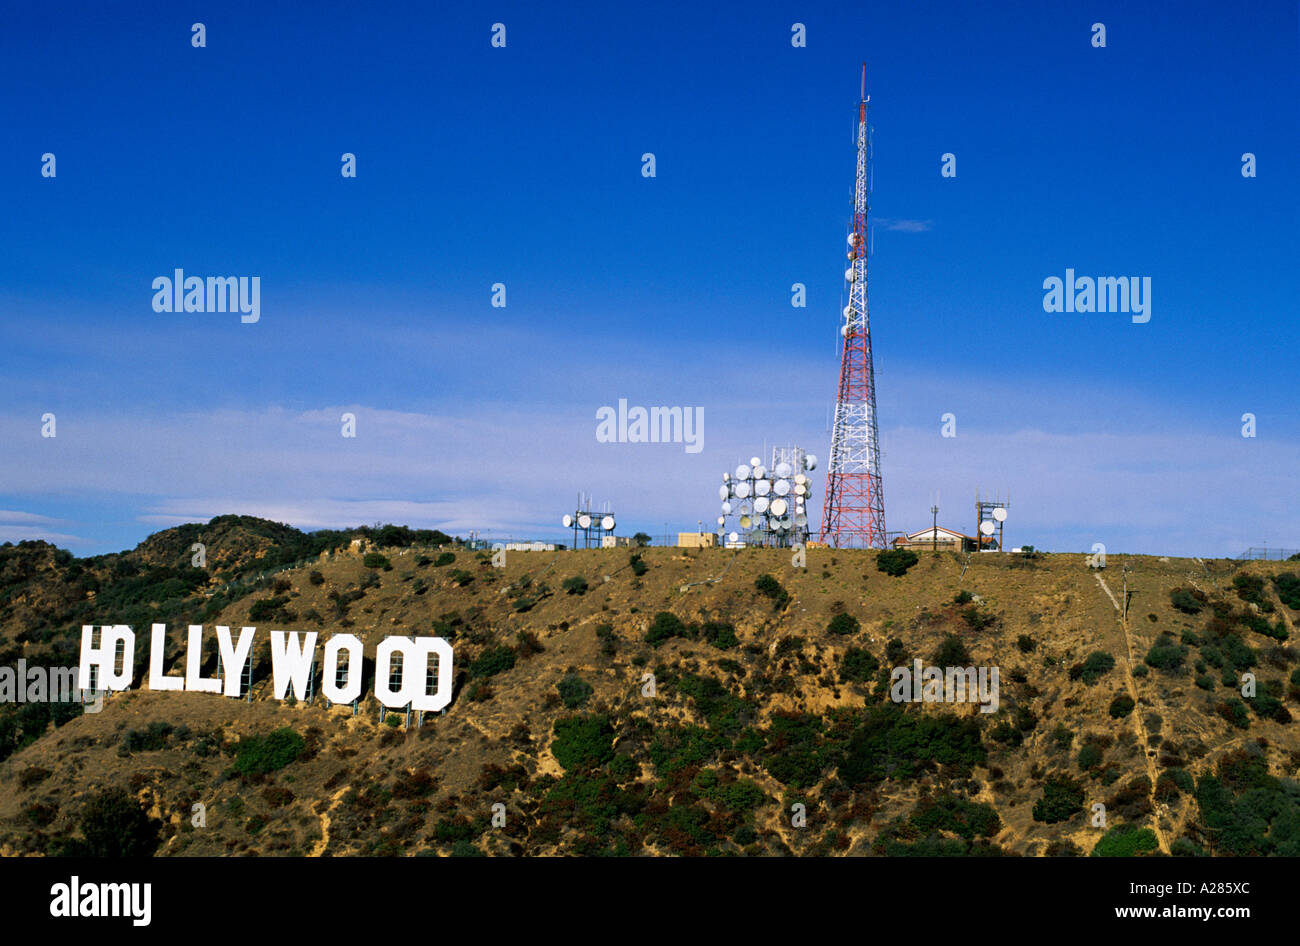 The Hollywood sign in Los Angeles, California along with radio, television, and cell phone towers. Stock Photo